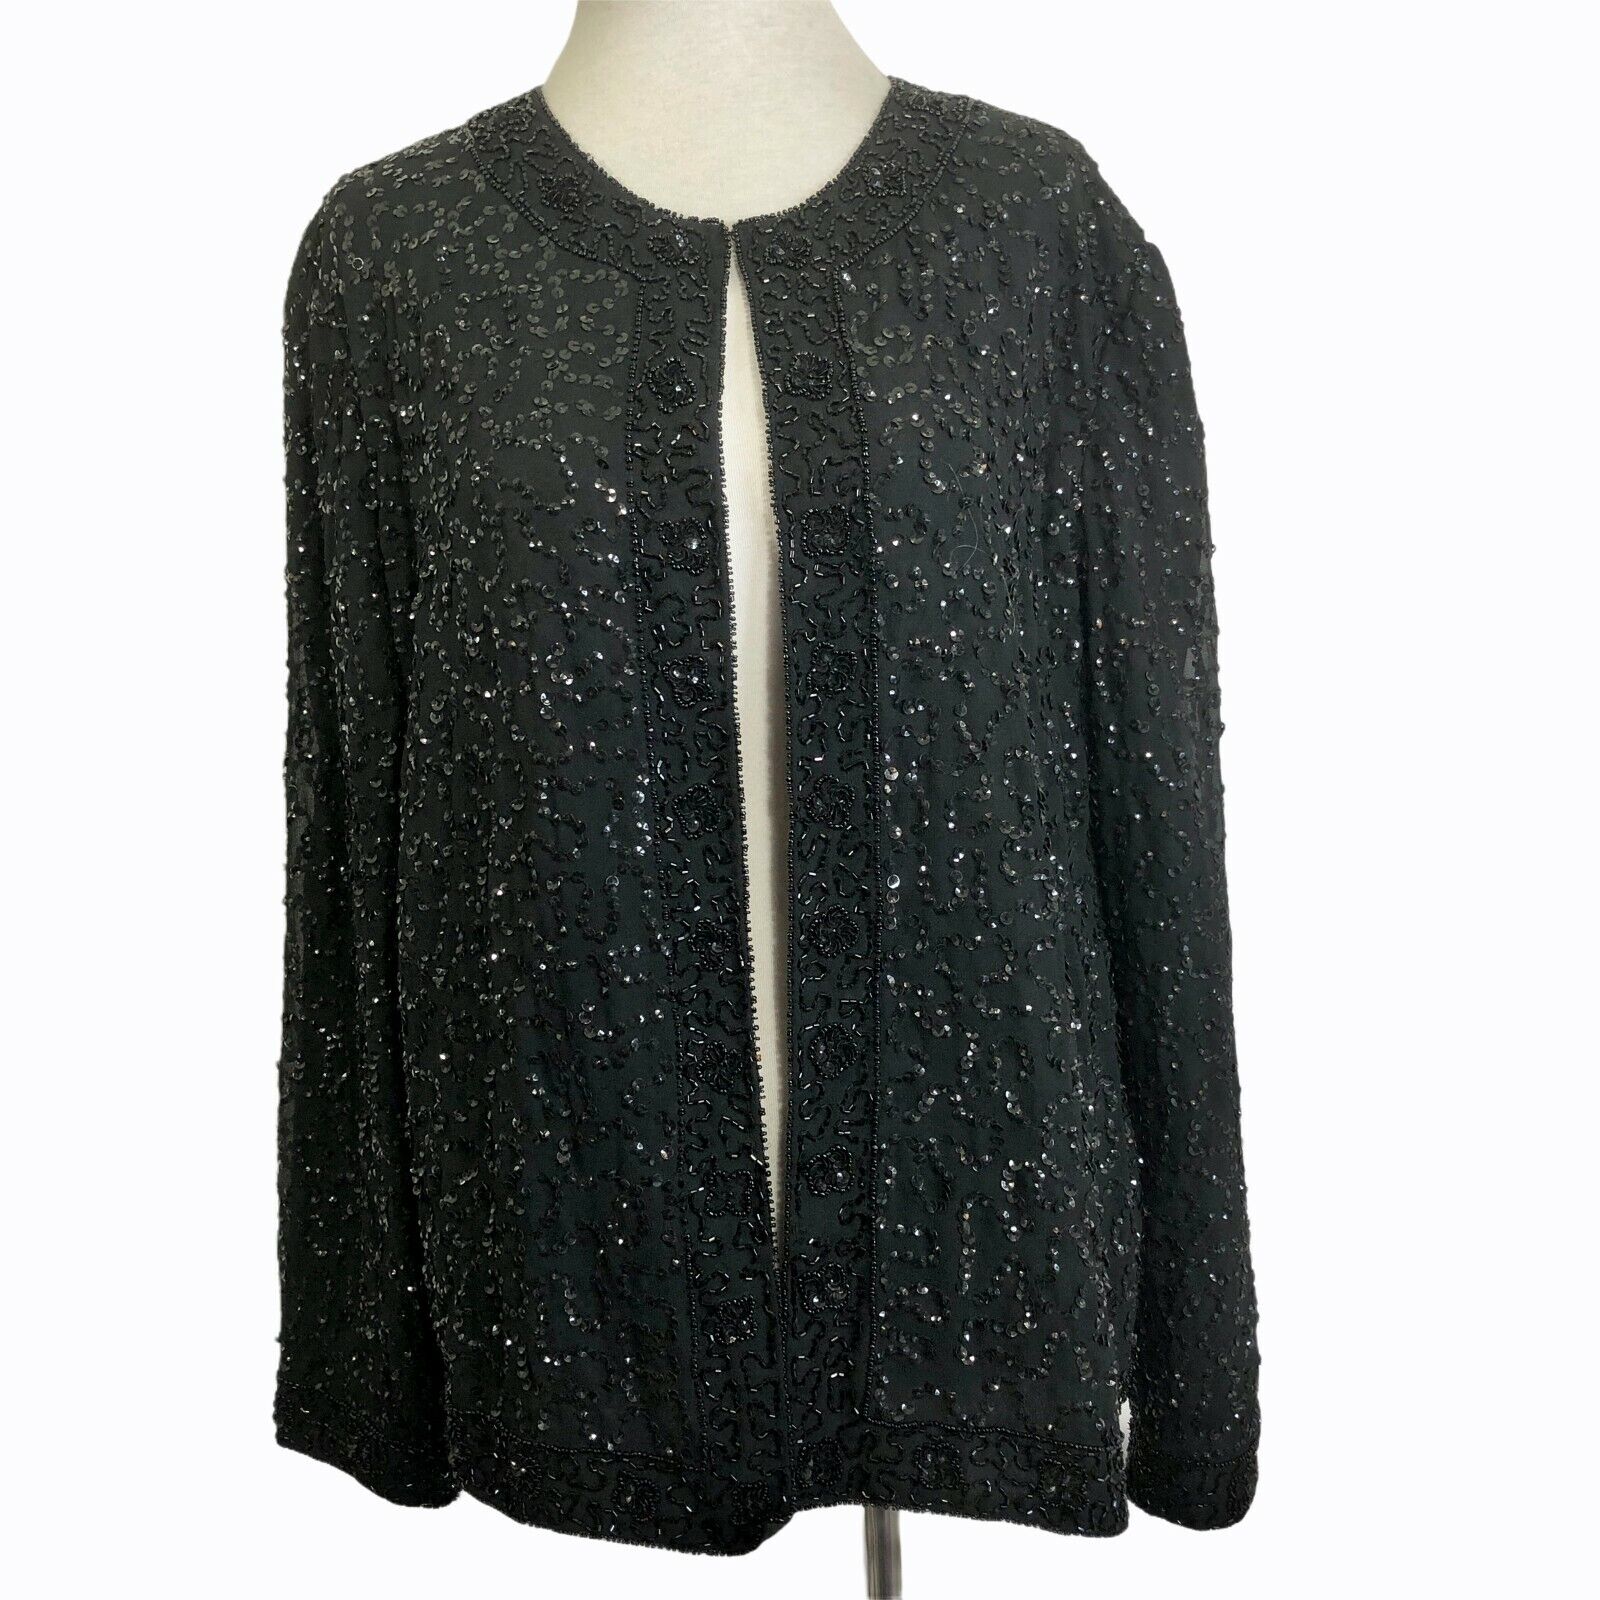 Vintage JMD Beaded Jacket Womens L Black Sequin Special Occasion